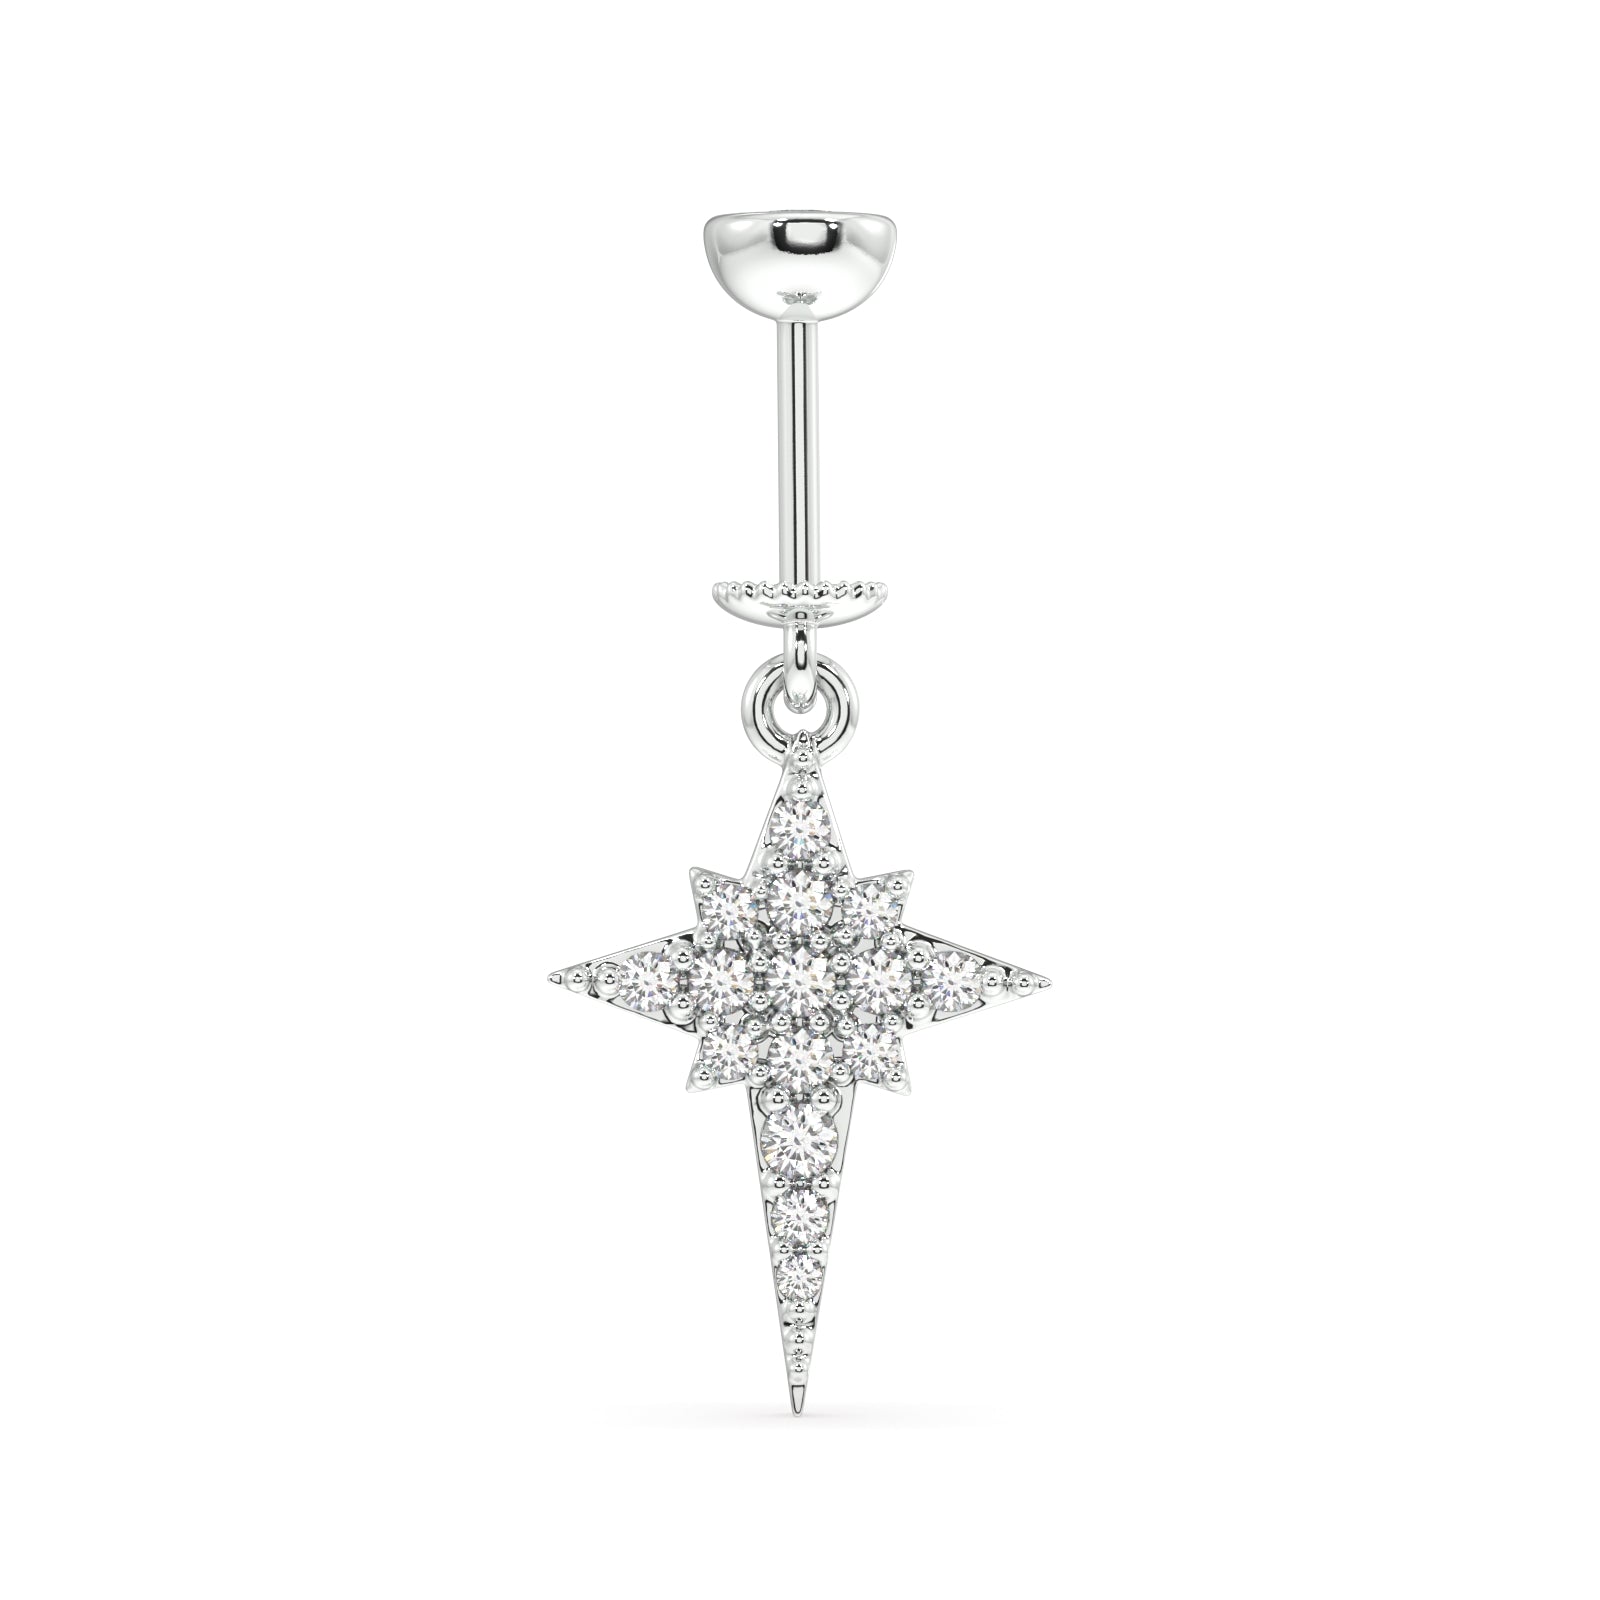 Helix Hanging Silver Celestial Star Charm Earring - Cosmic Elegance for Your Ear Stack